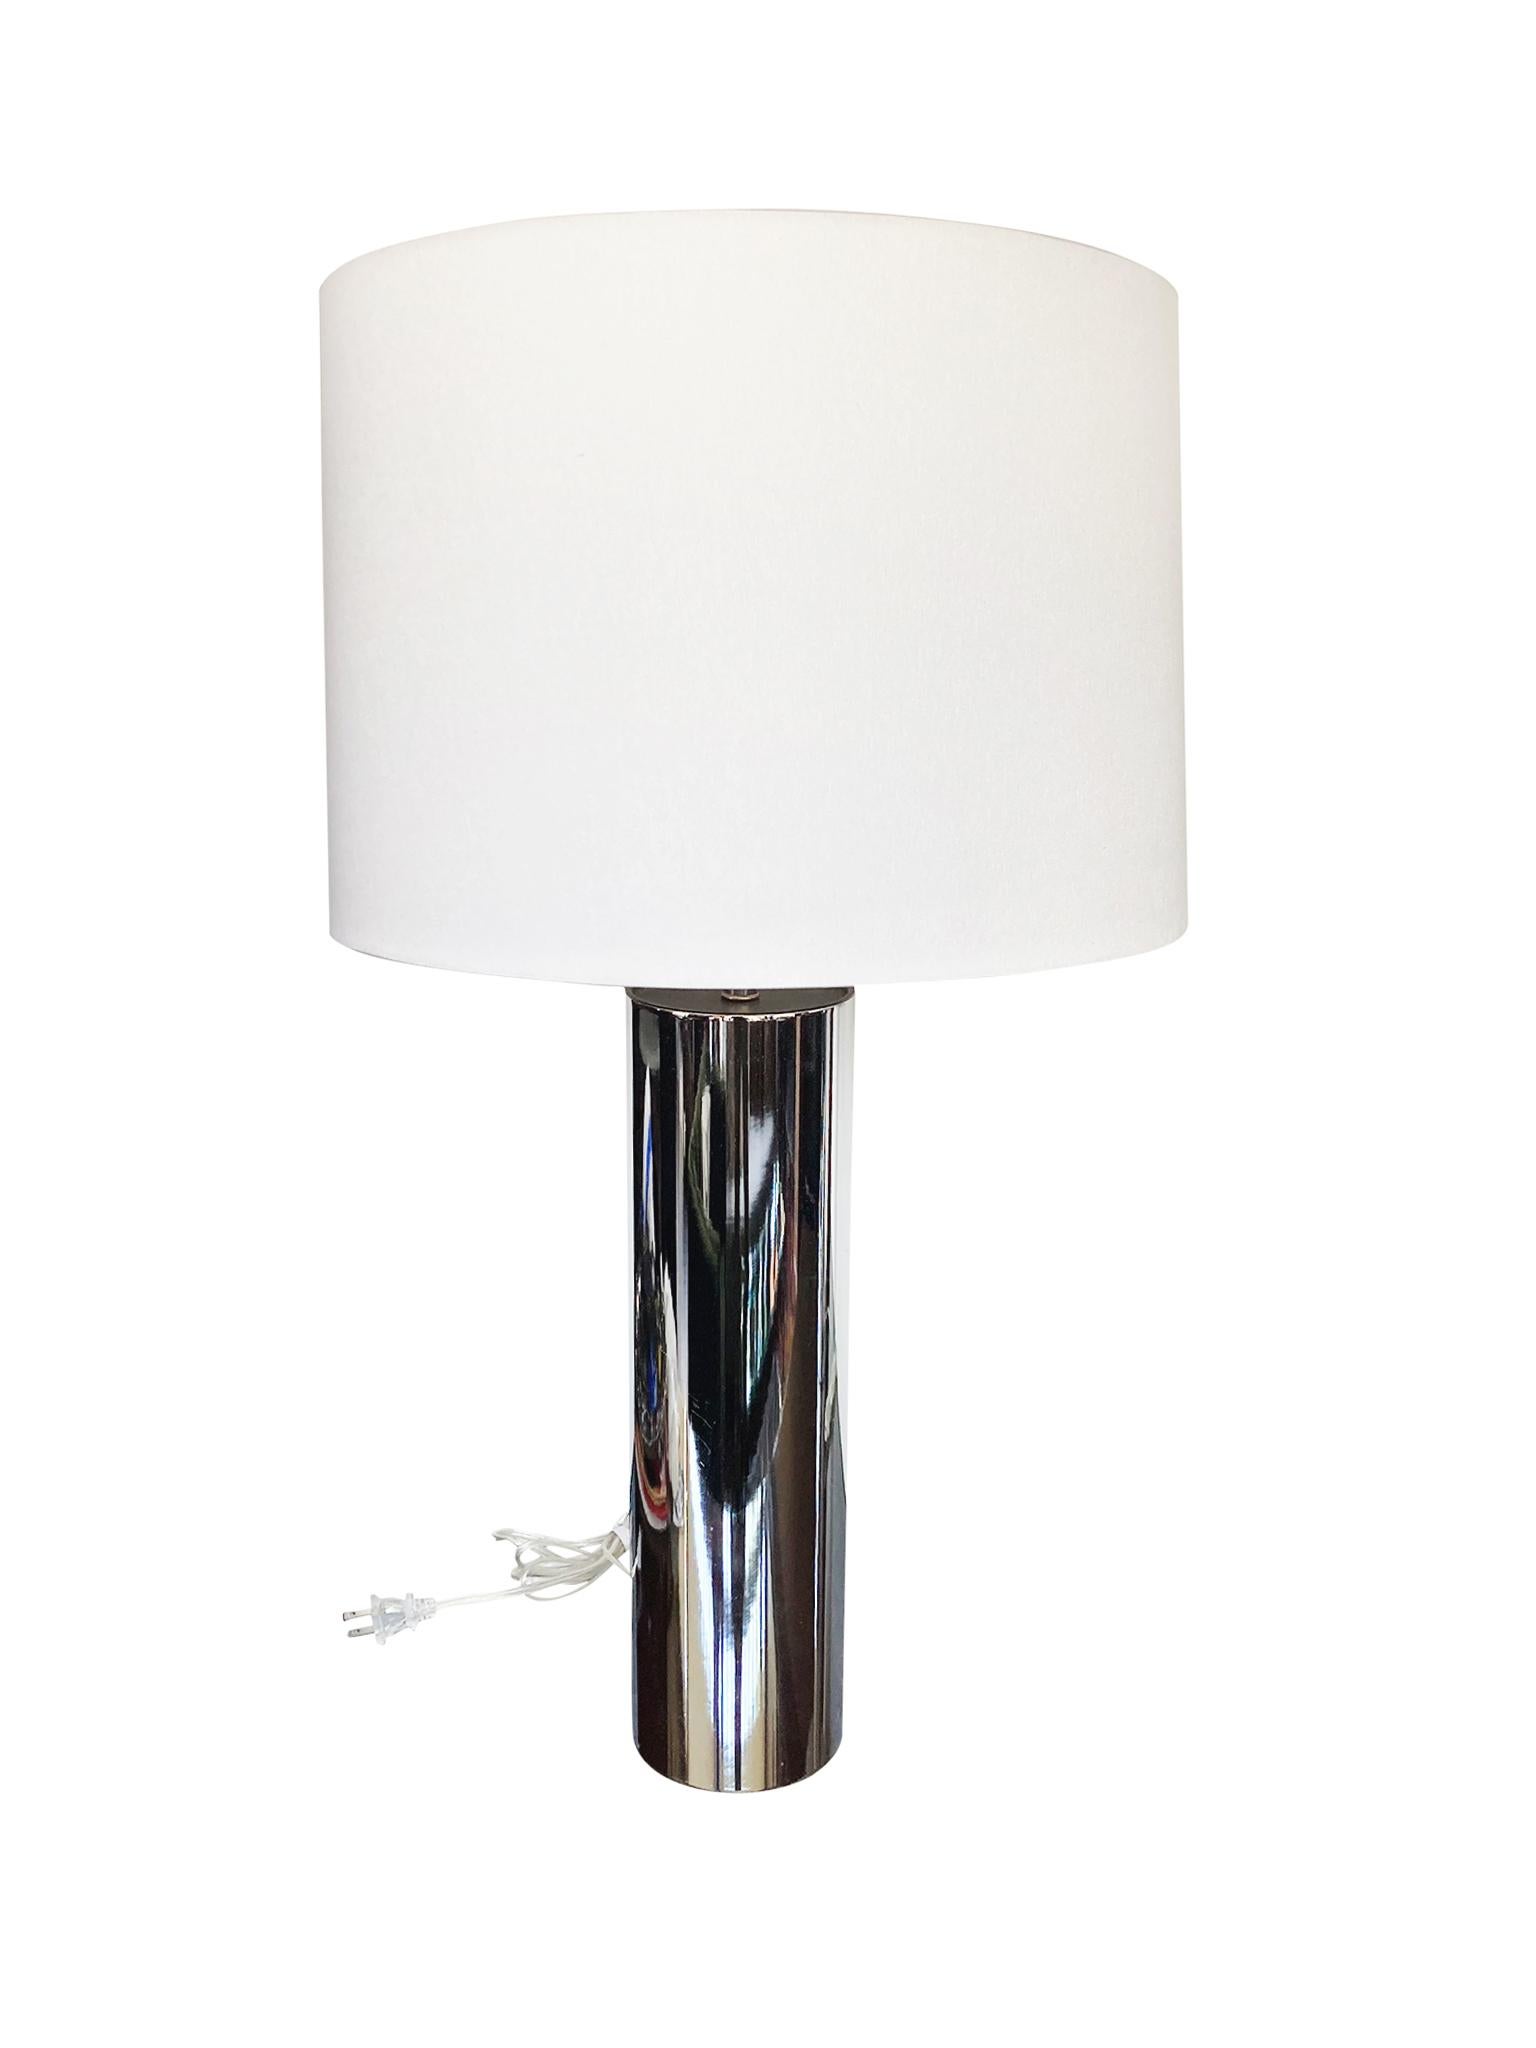 Late 20th Century Pair of 1970s Chrome Cylinder Table Lamps Attributed to George Kovacs